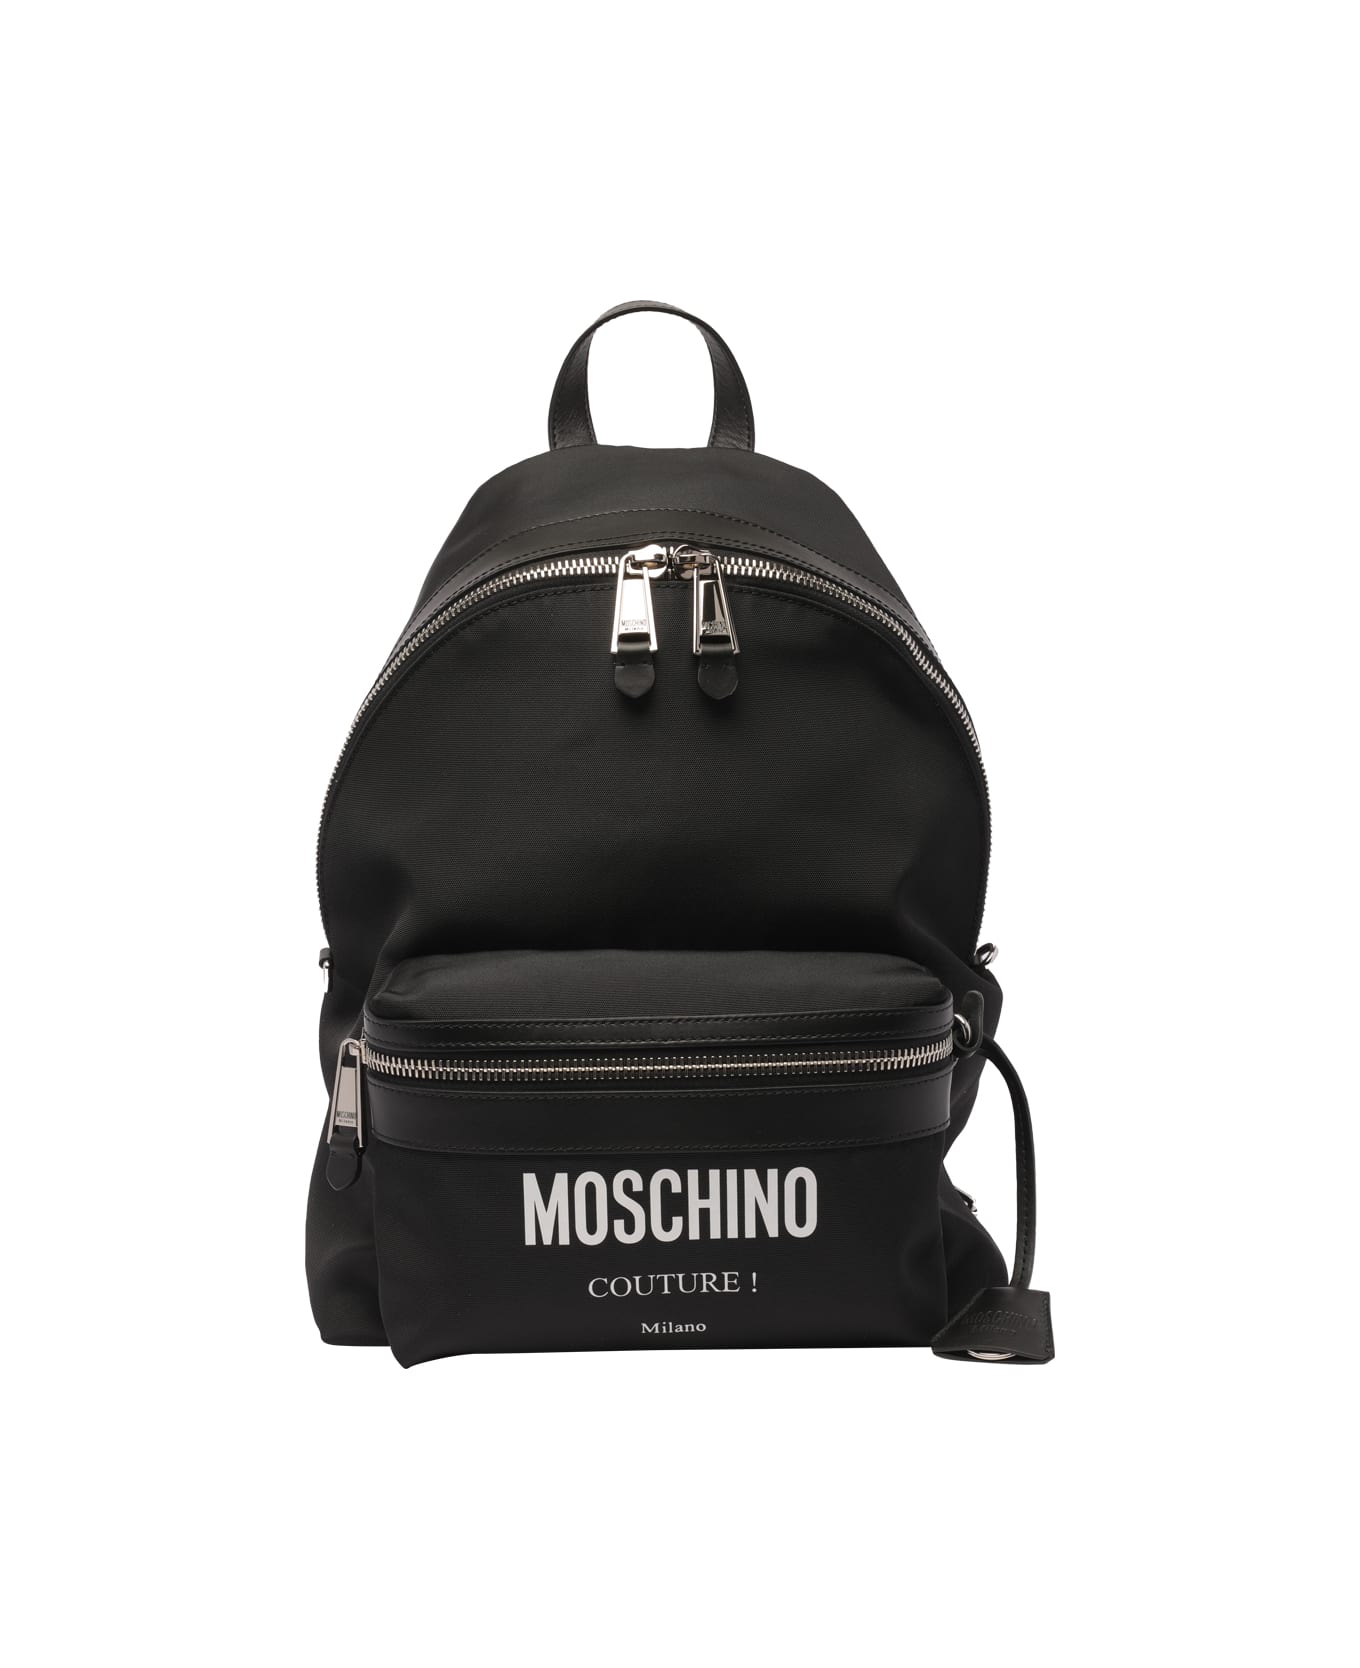 Moschino Couture Backpack - Black バックパック